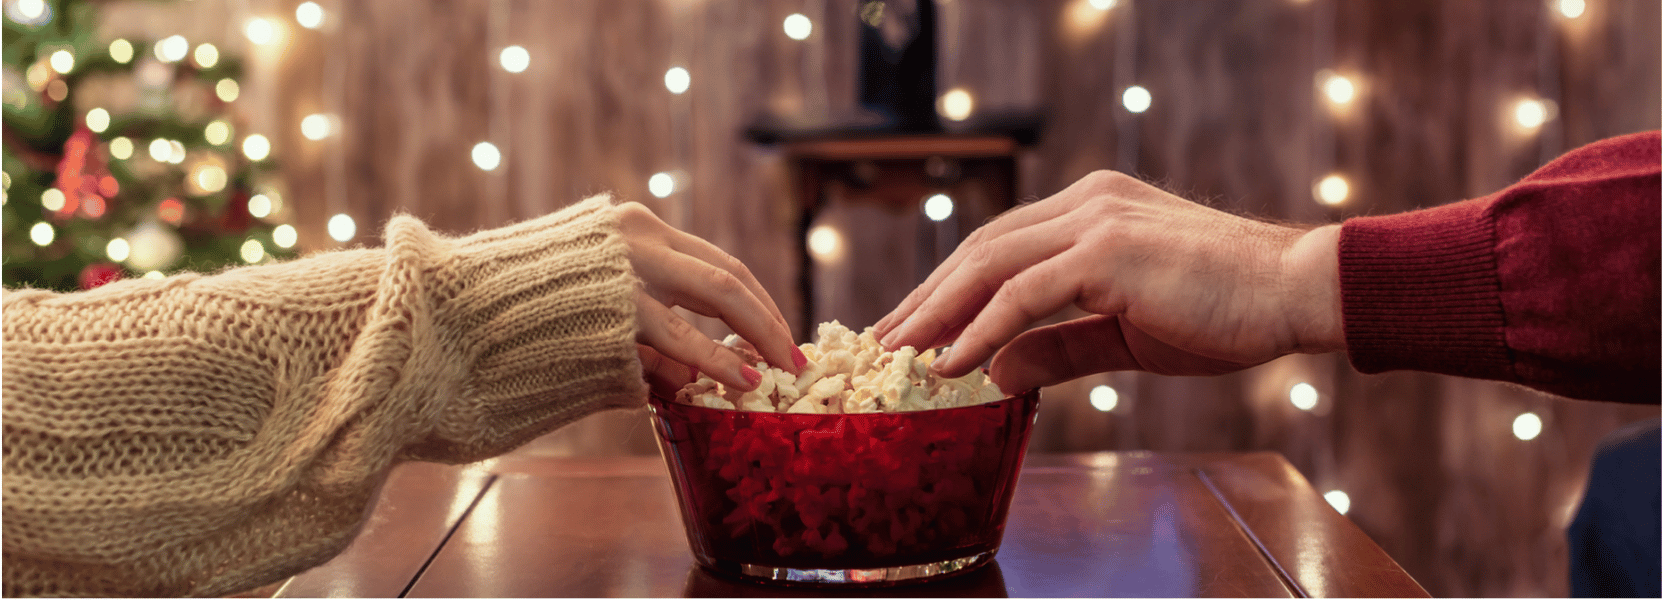 two hands share bowl of popcorn guide to movie lover gifts